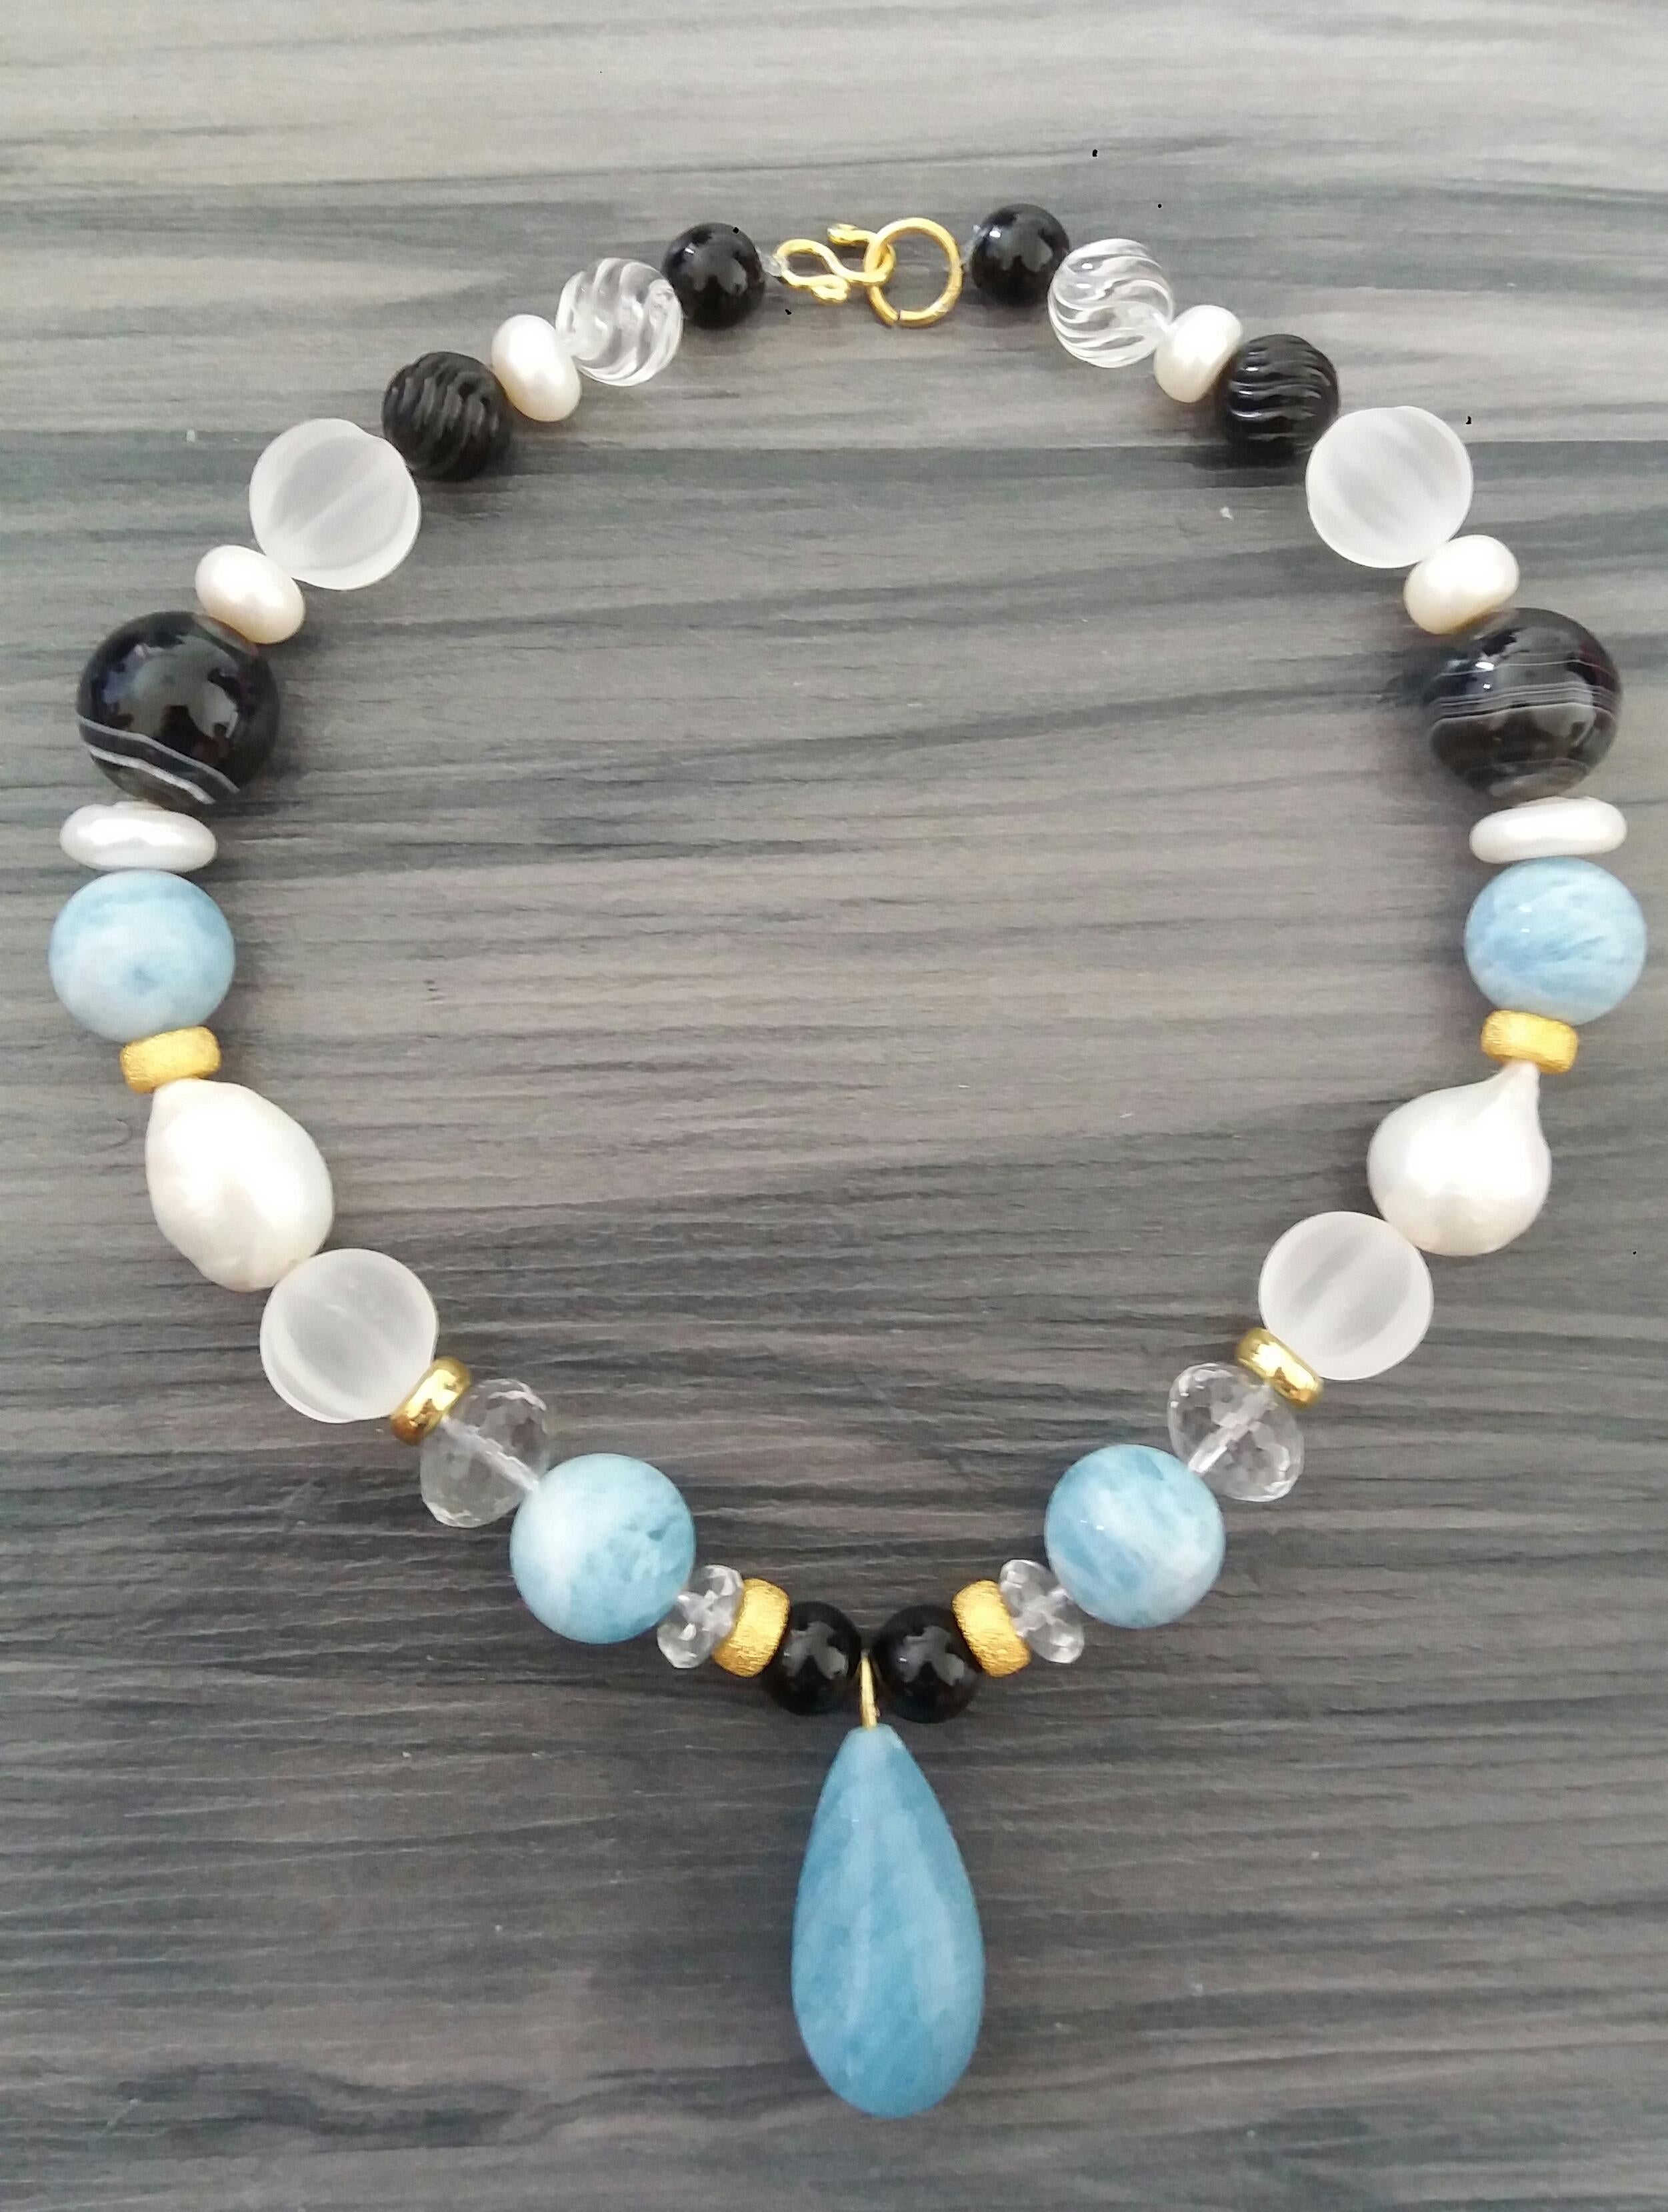 Aquamarine Beads And Pendant Baroque Pearls Quartz Onyx Yellow Gold Necklace For Sale 9